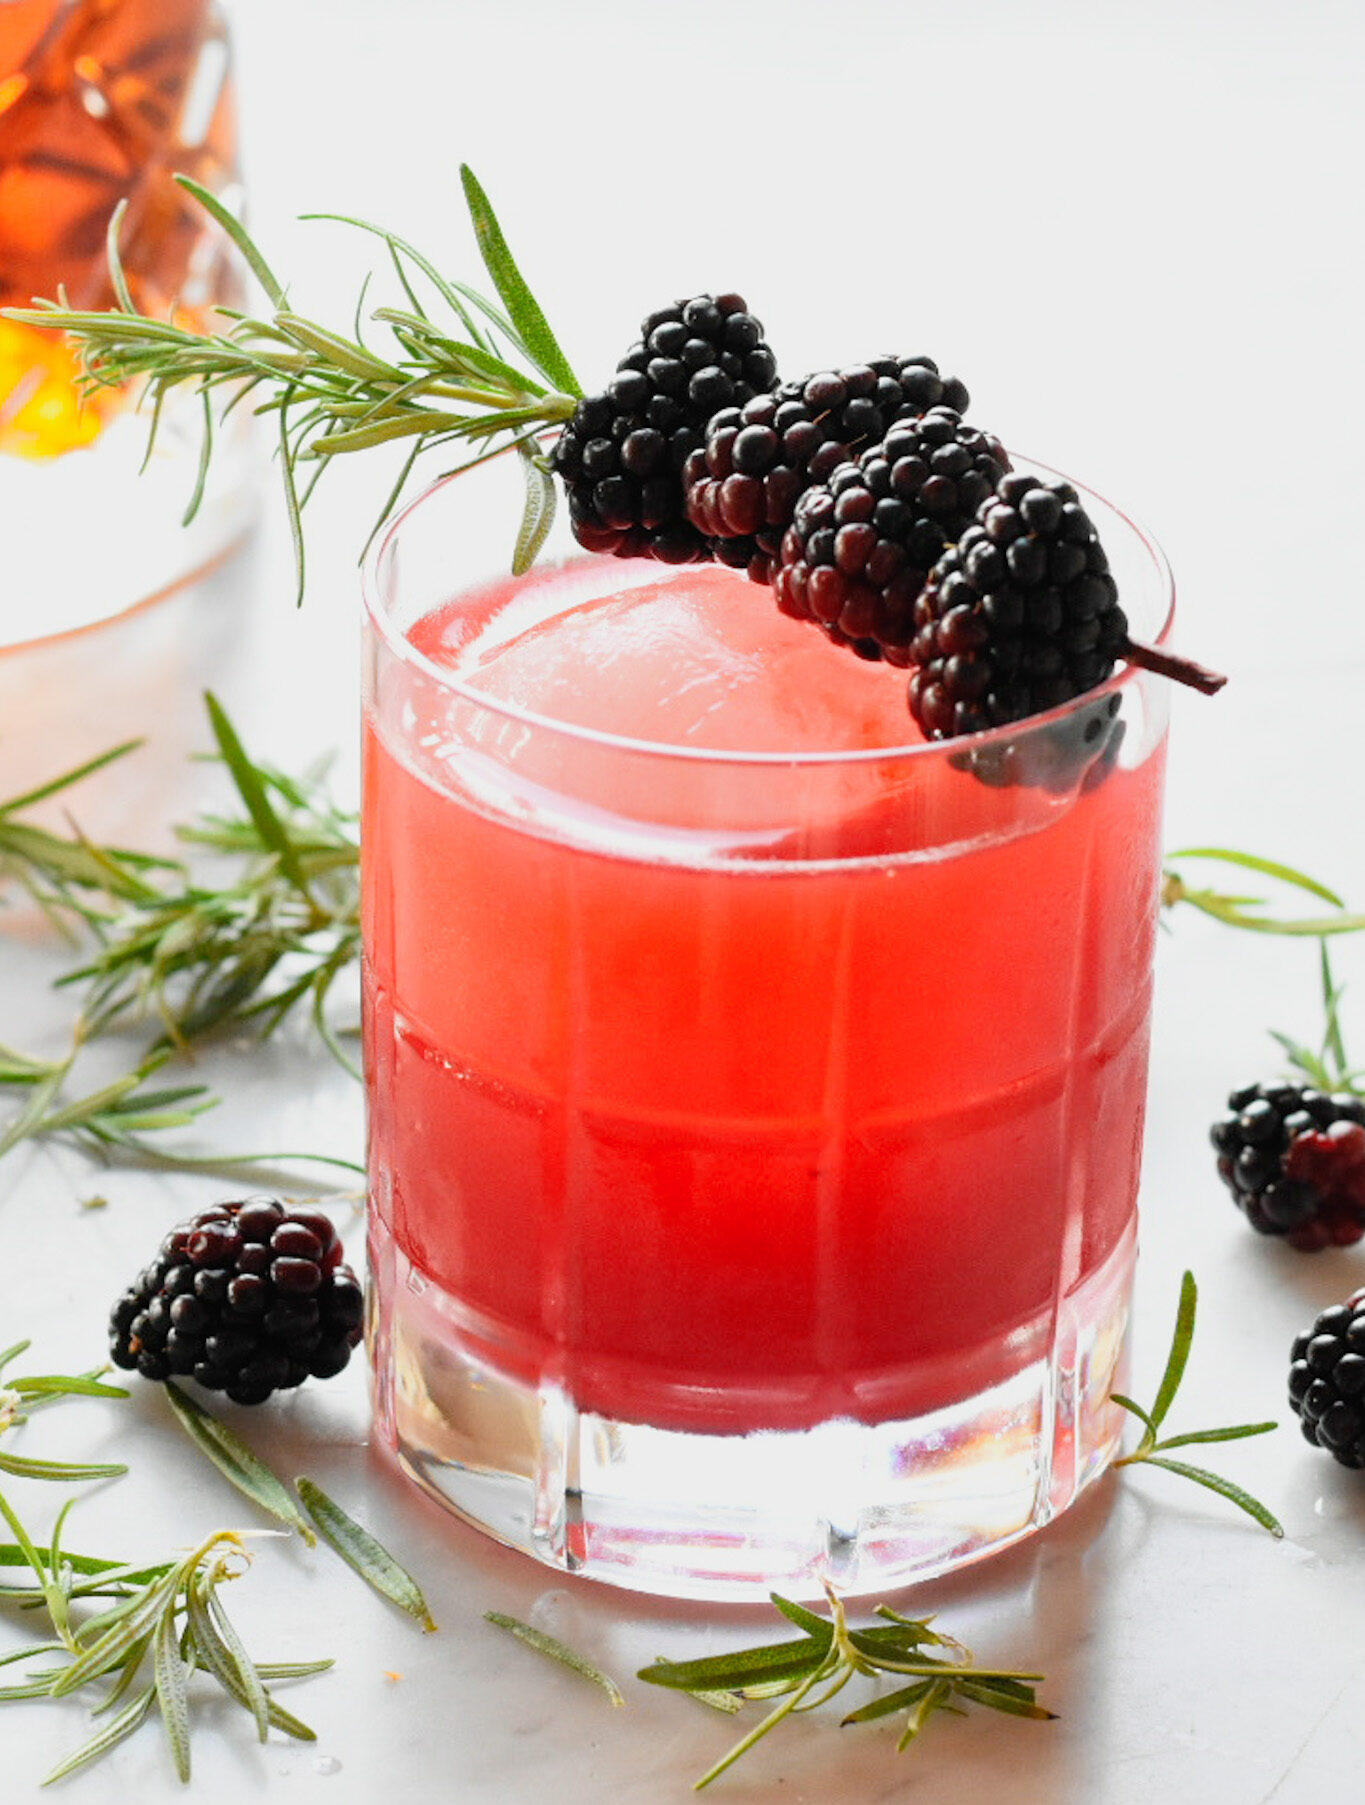 Blackberry bourbon sour in a glass with rosemary and blackberry garnish